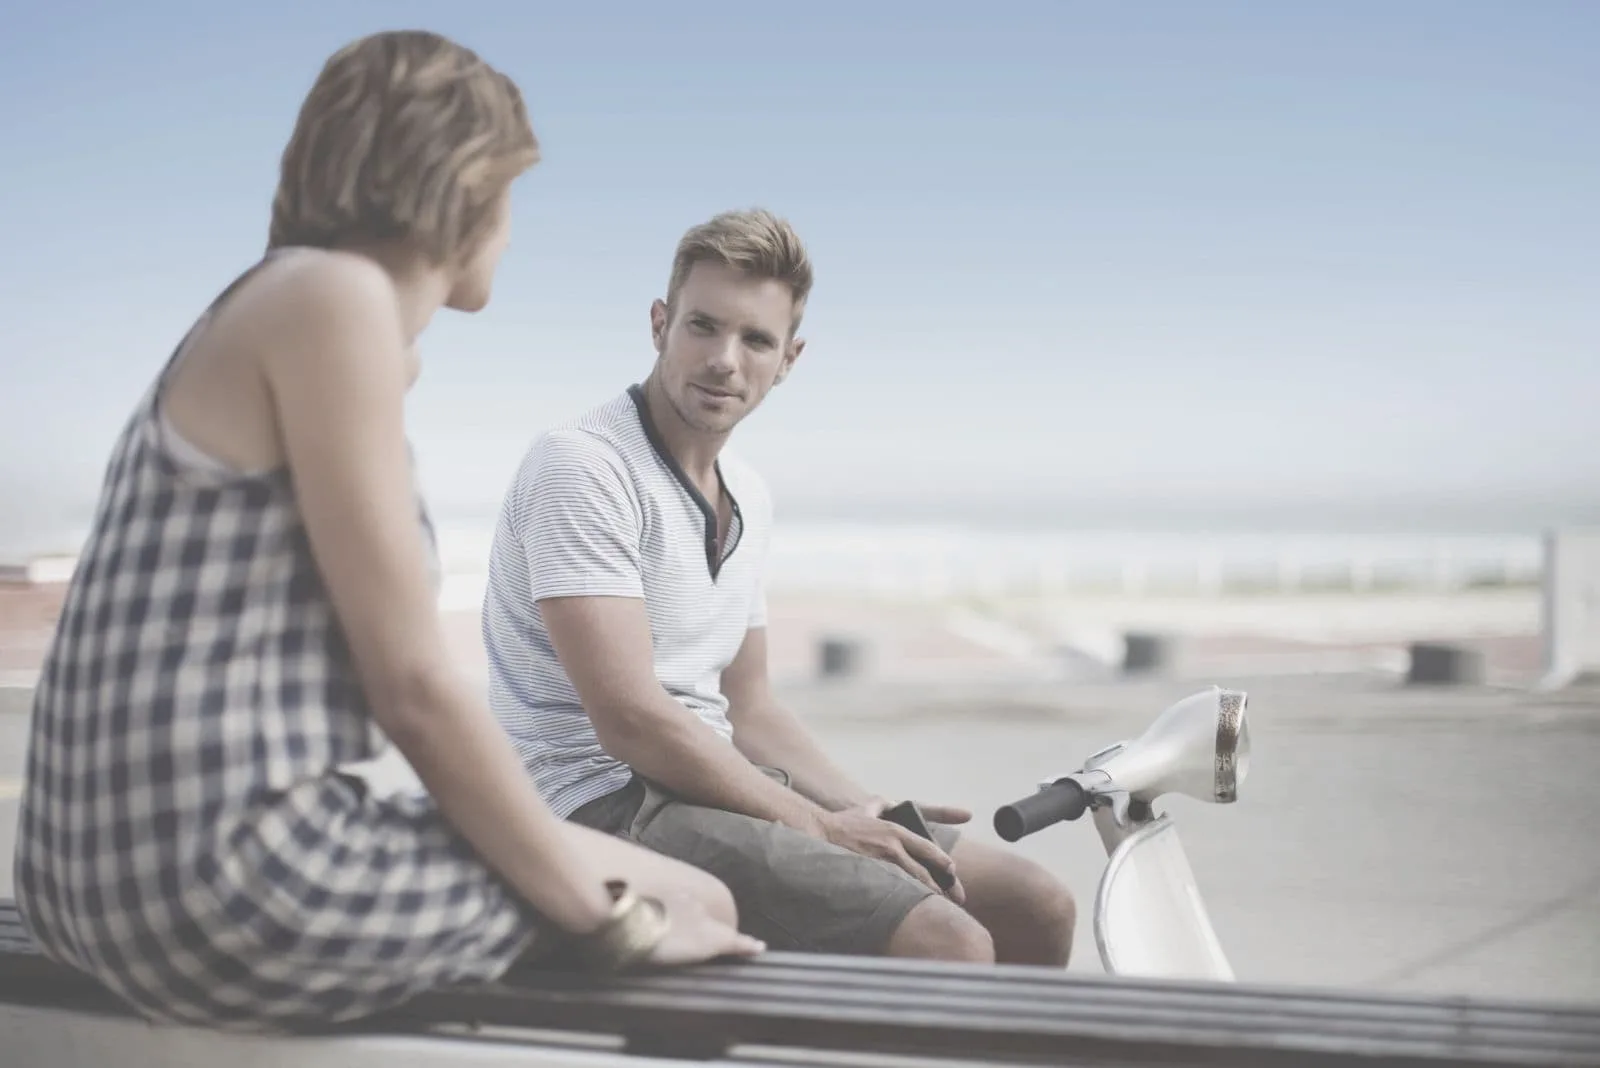 man sitting on a scooter talking to a woman sitting on the bench outdoors